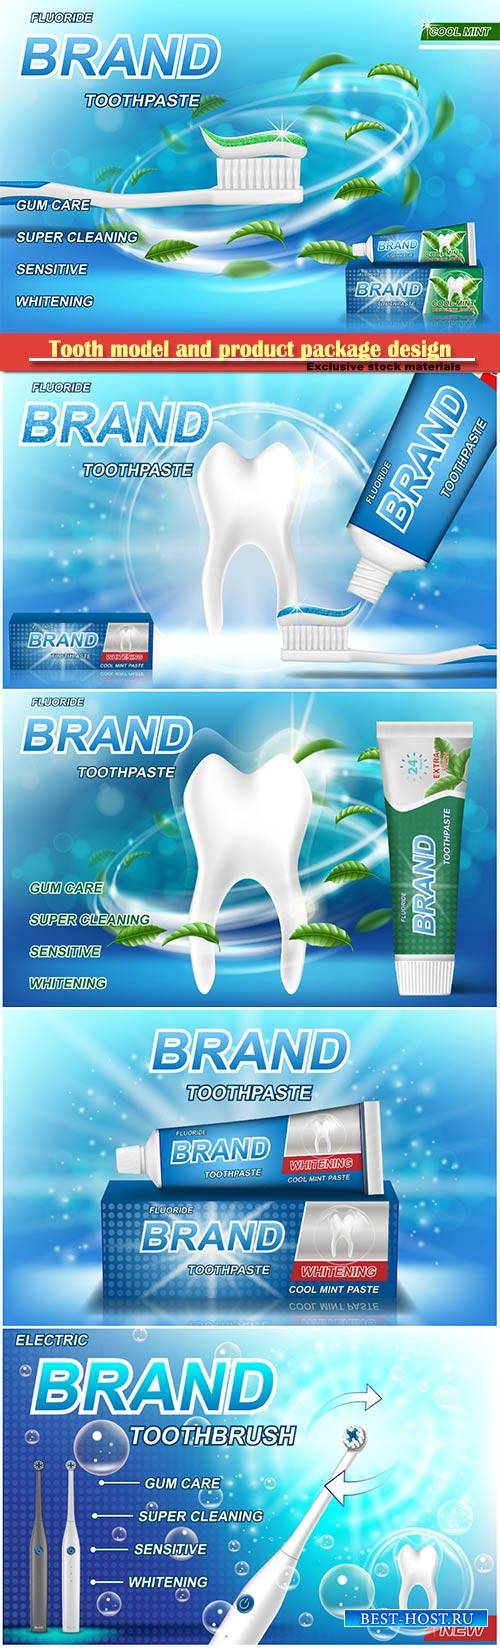 Tooth model and product package design for toothpaste poster or advertising